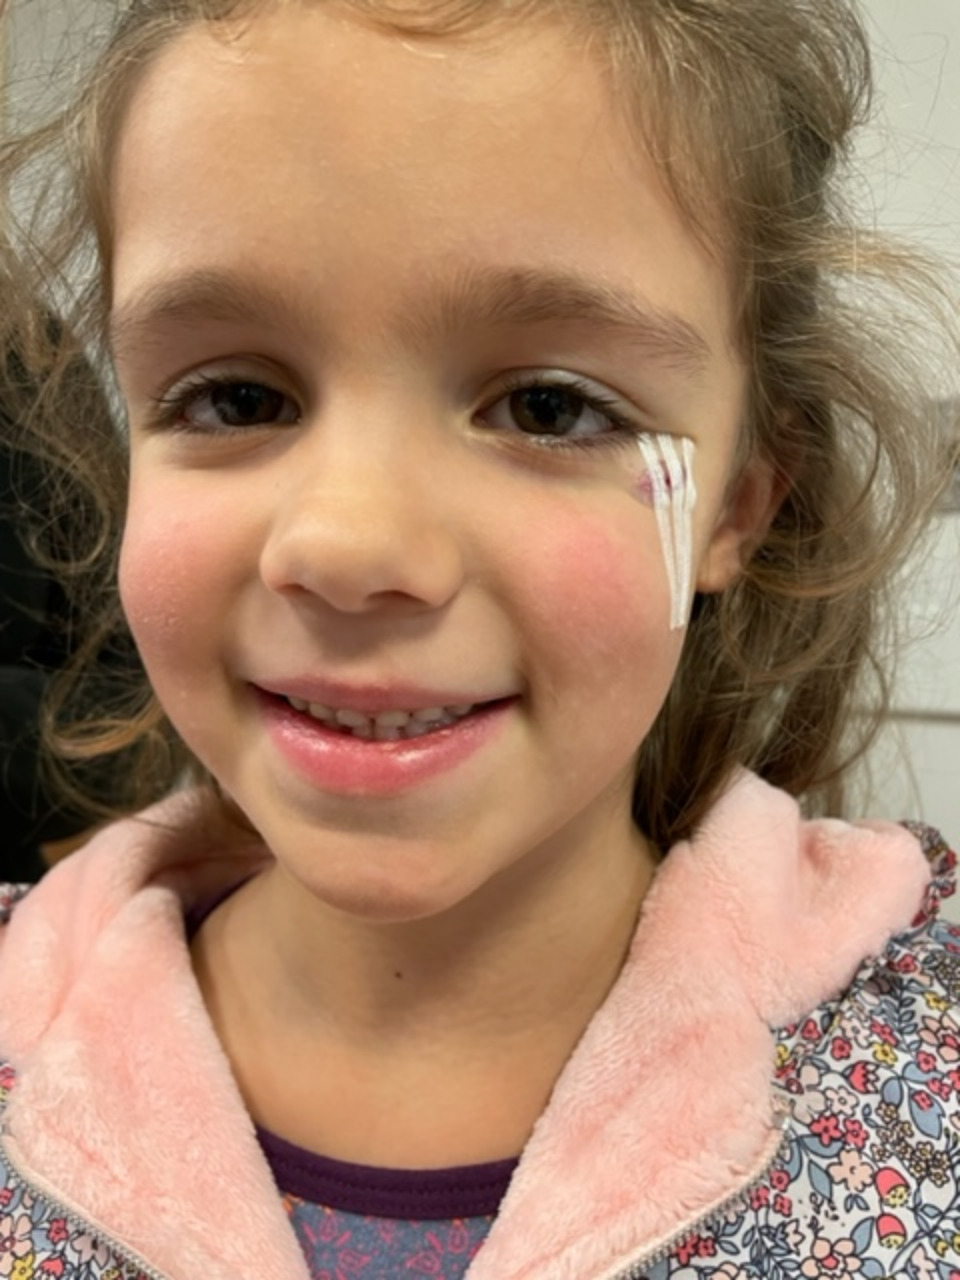 Young girl with facial stitches